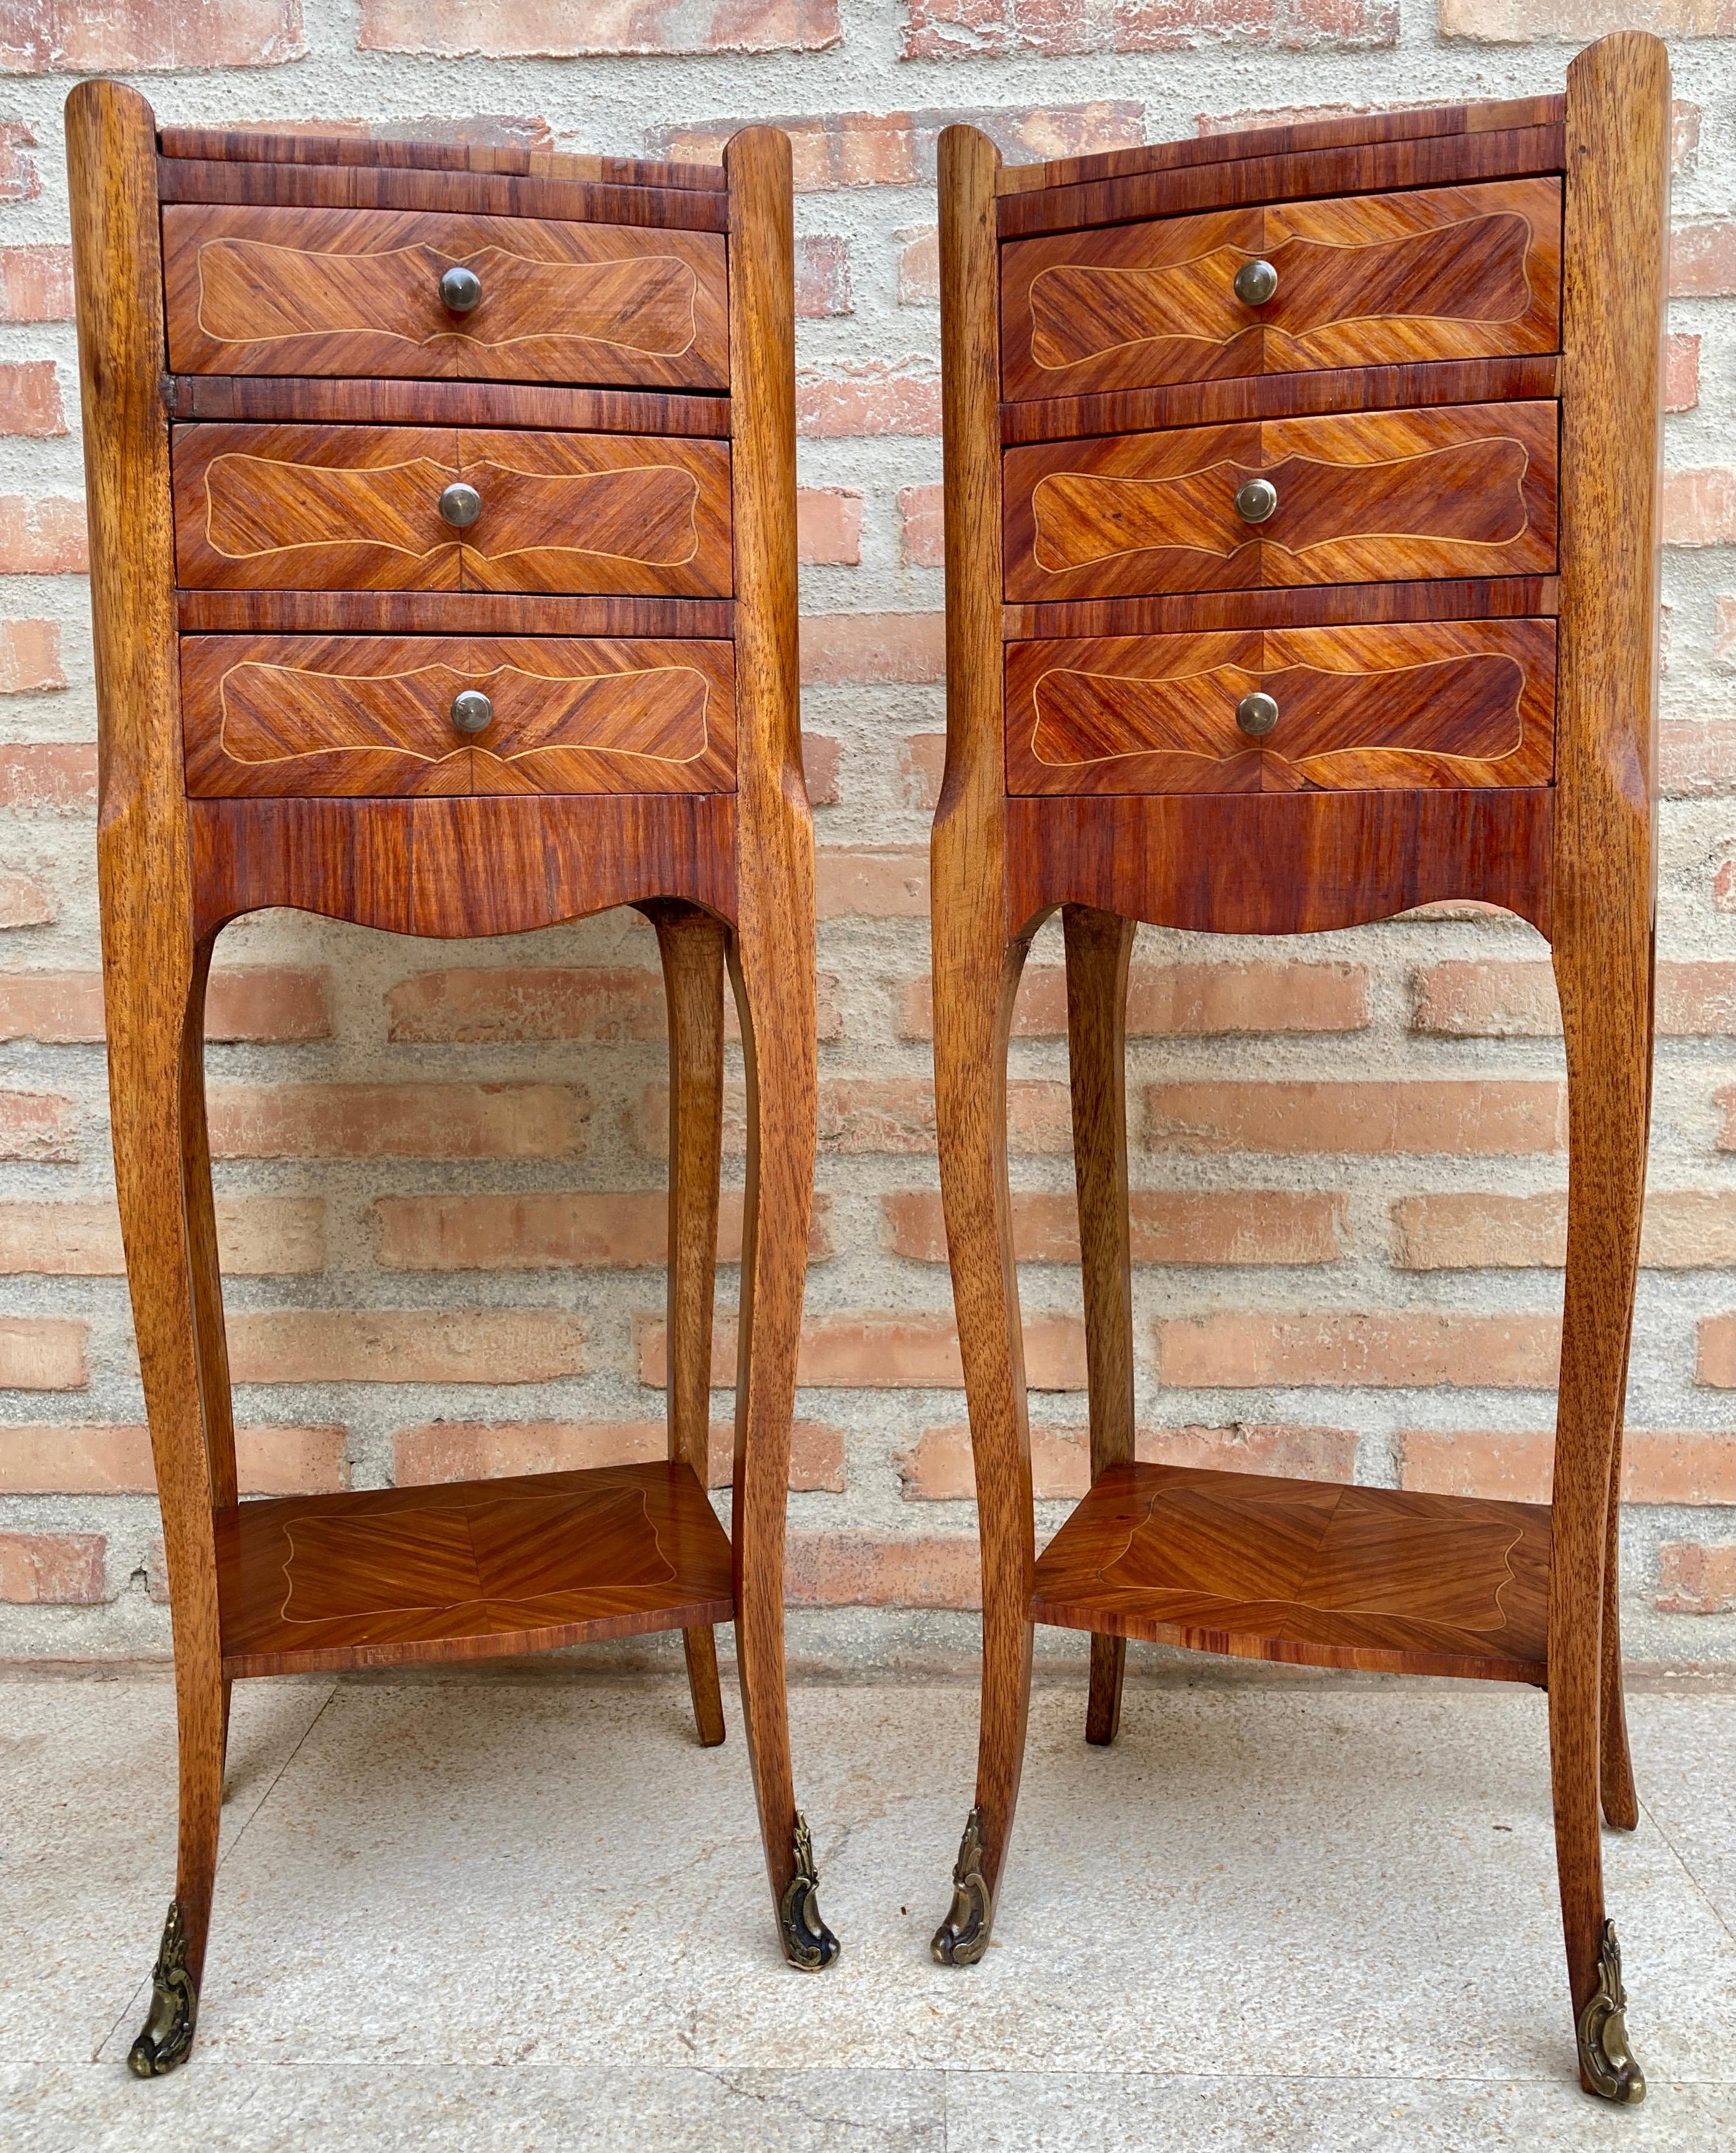 Pair of French walnut bedside tables adorned with fine Louis XV marquetry from the early 19th century. This pair of French 'tables de chevet' was created in the early years of the 19th century, at a time when the country revisited the rococo style